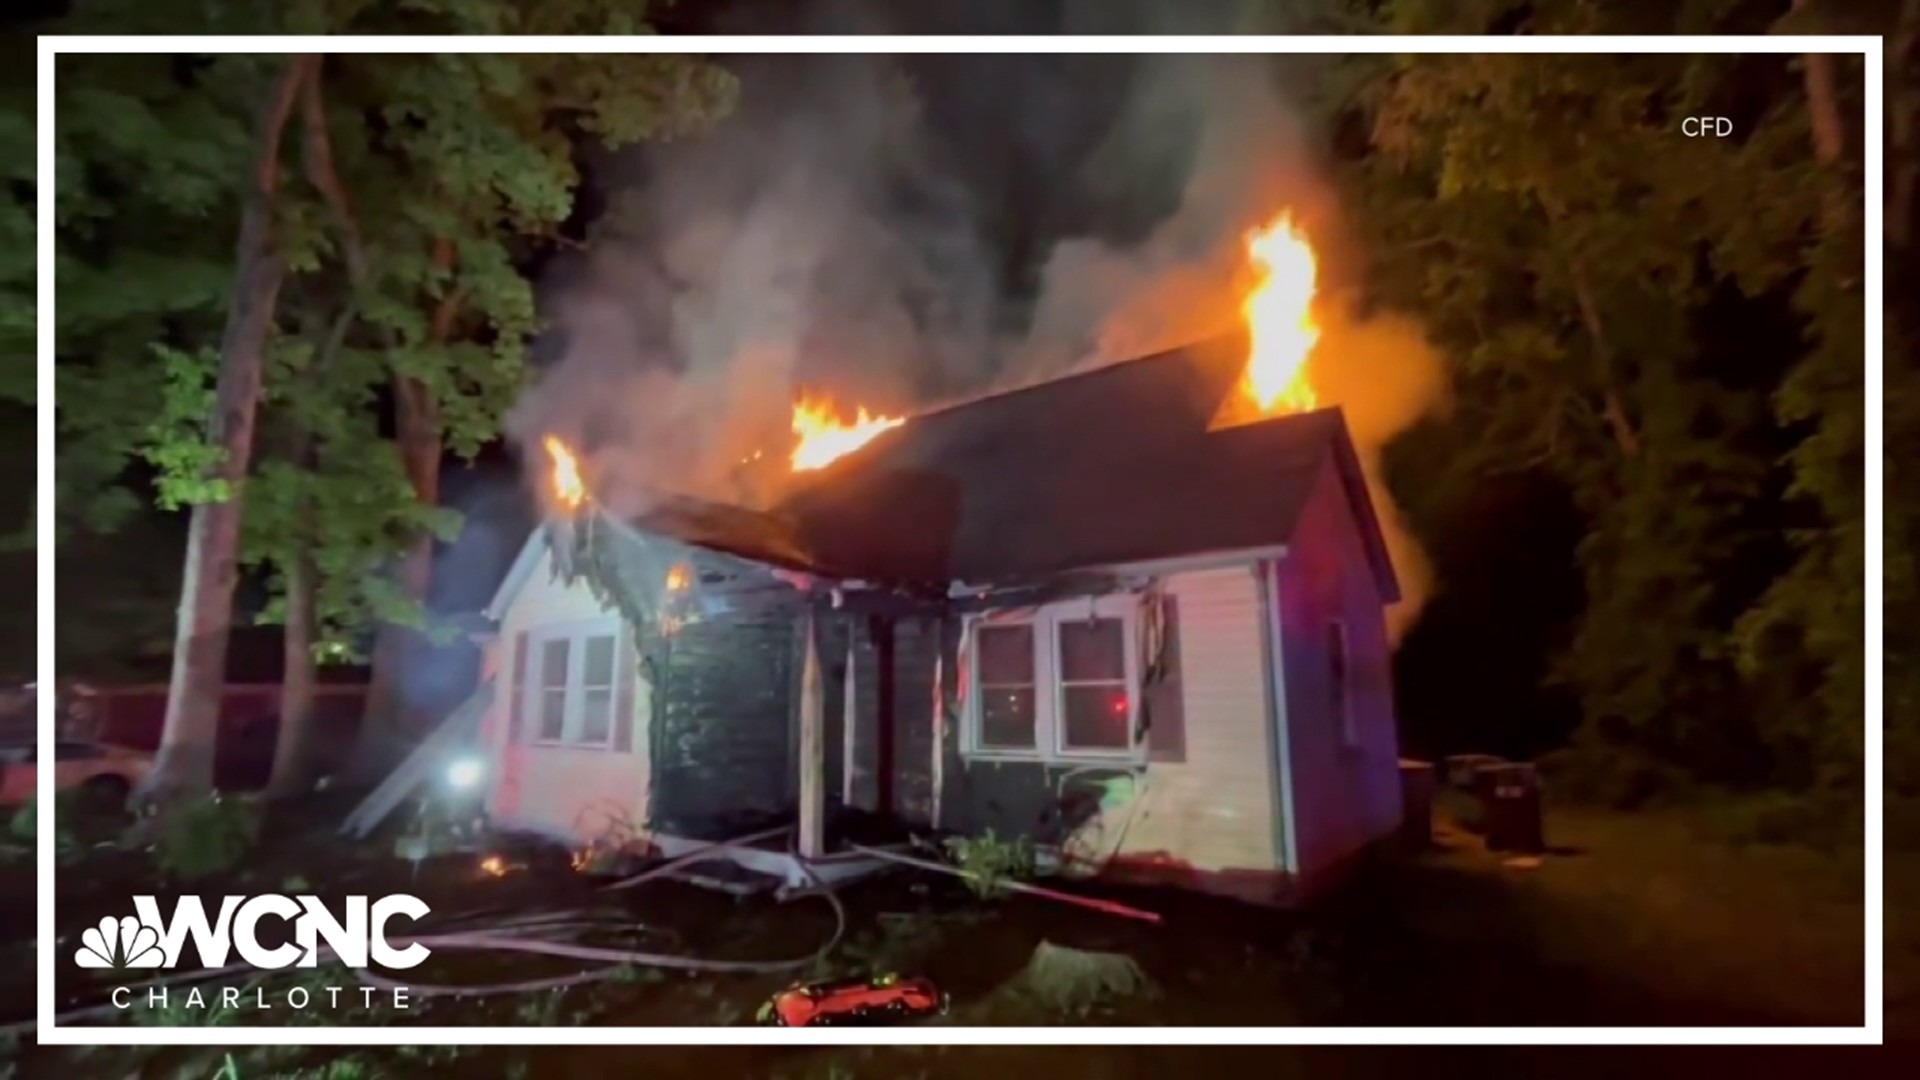 Investigators believe the house fire that injured three firefighters was set on purpose. It started at a home on Grimes Street around 3 a.m. Thursday.